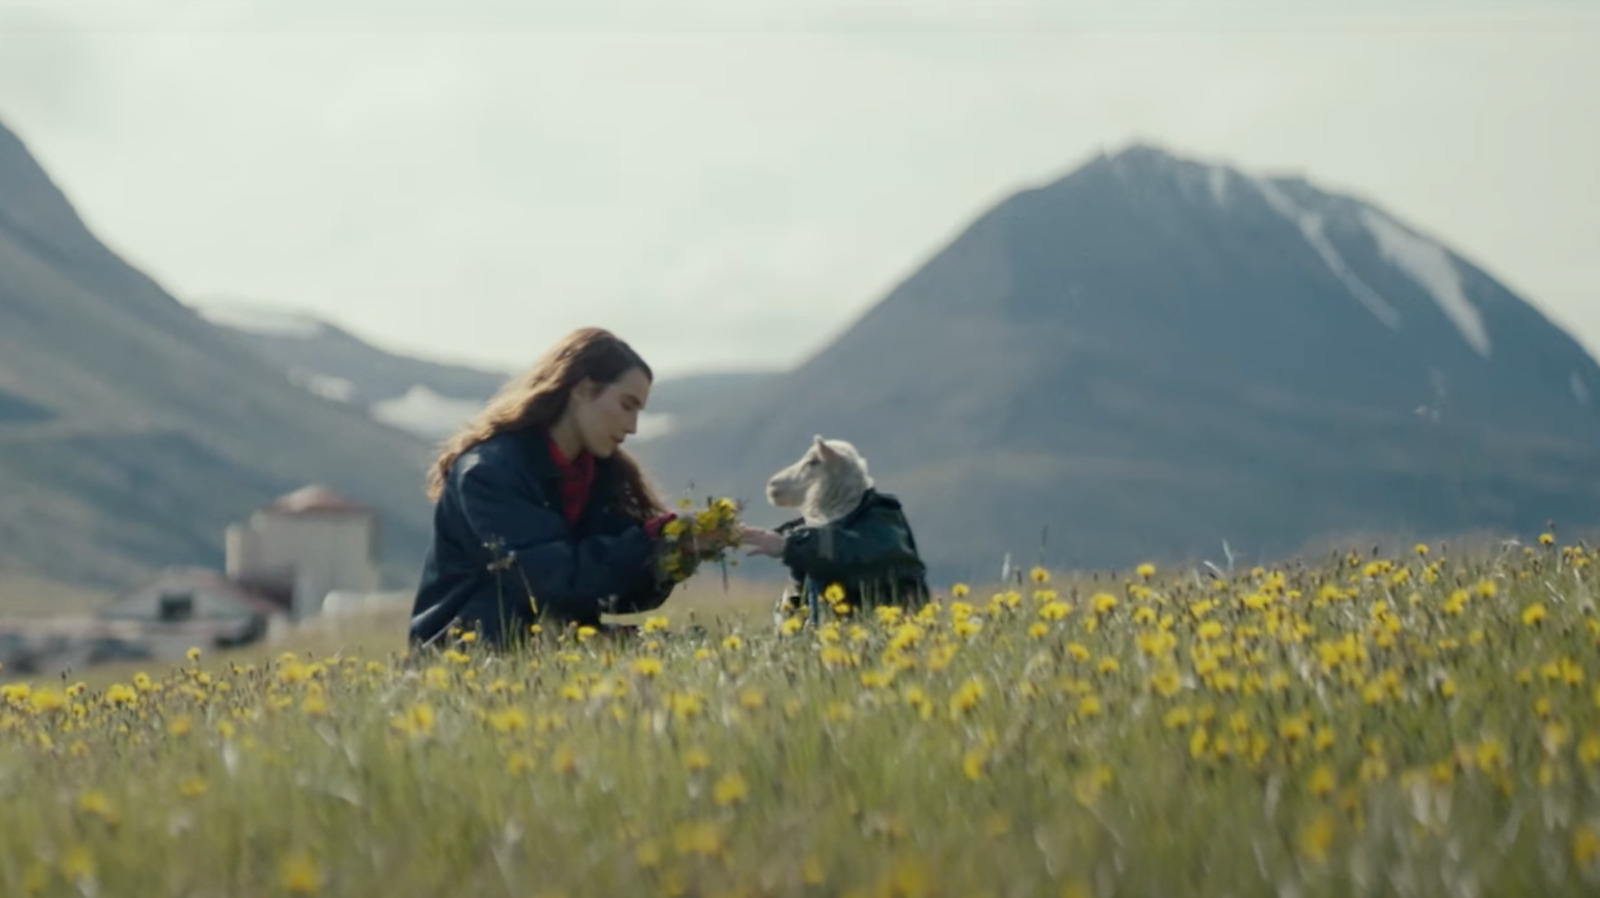 Noomi Rapace and the lamb in Lamb